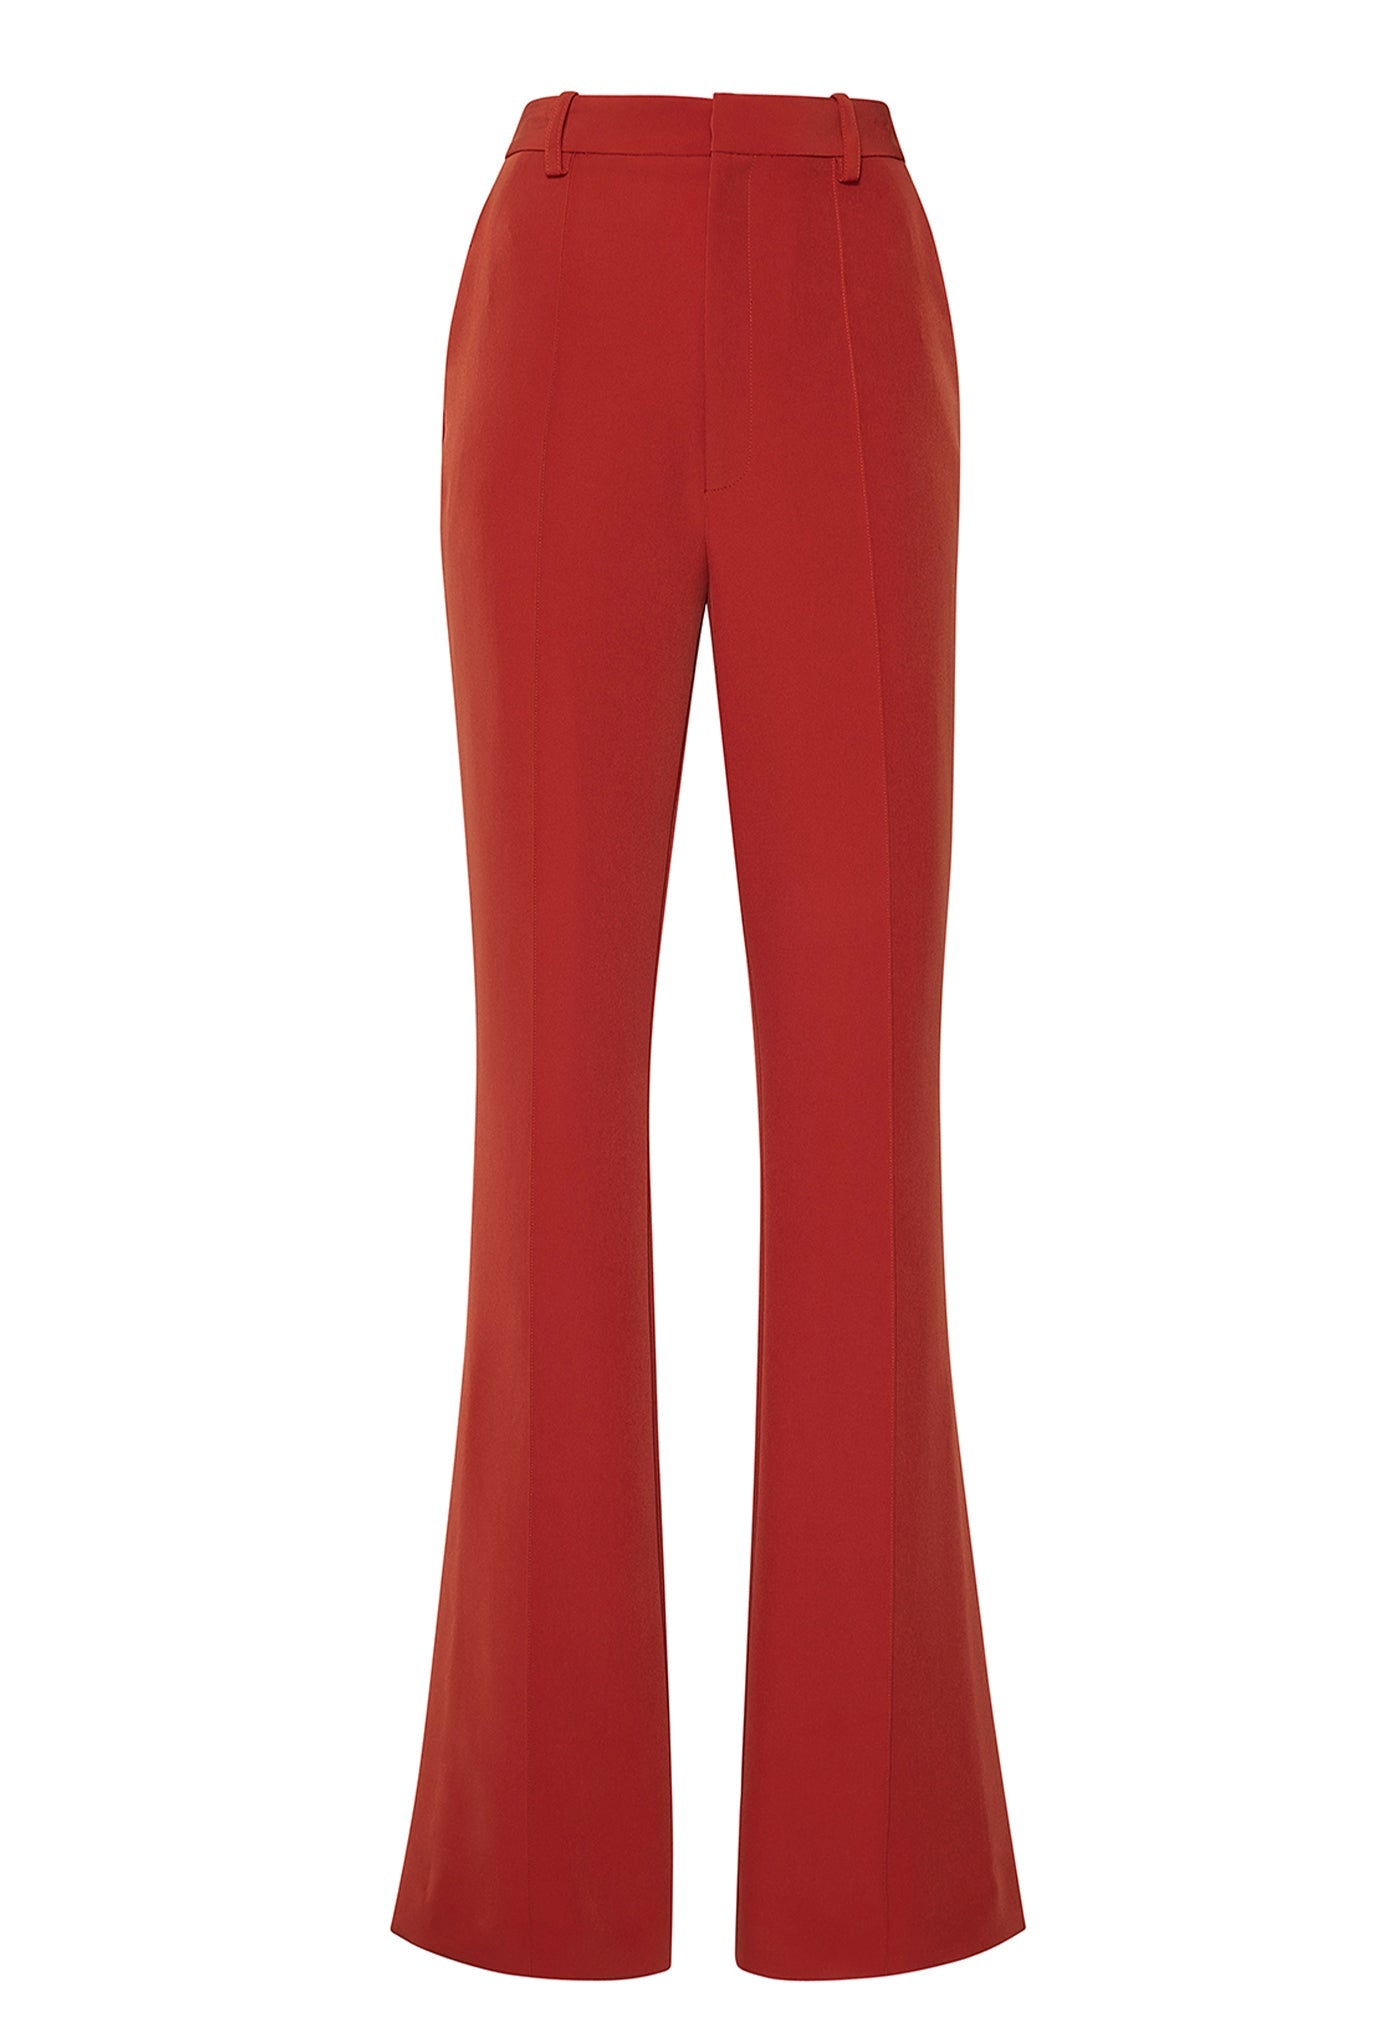 MATTE CREPE HIGH WAISTED FLARE LEG PANT - LAPOINTE